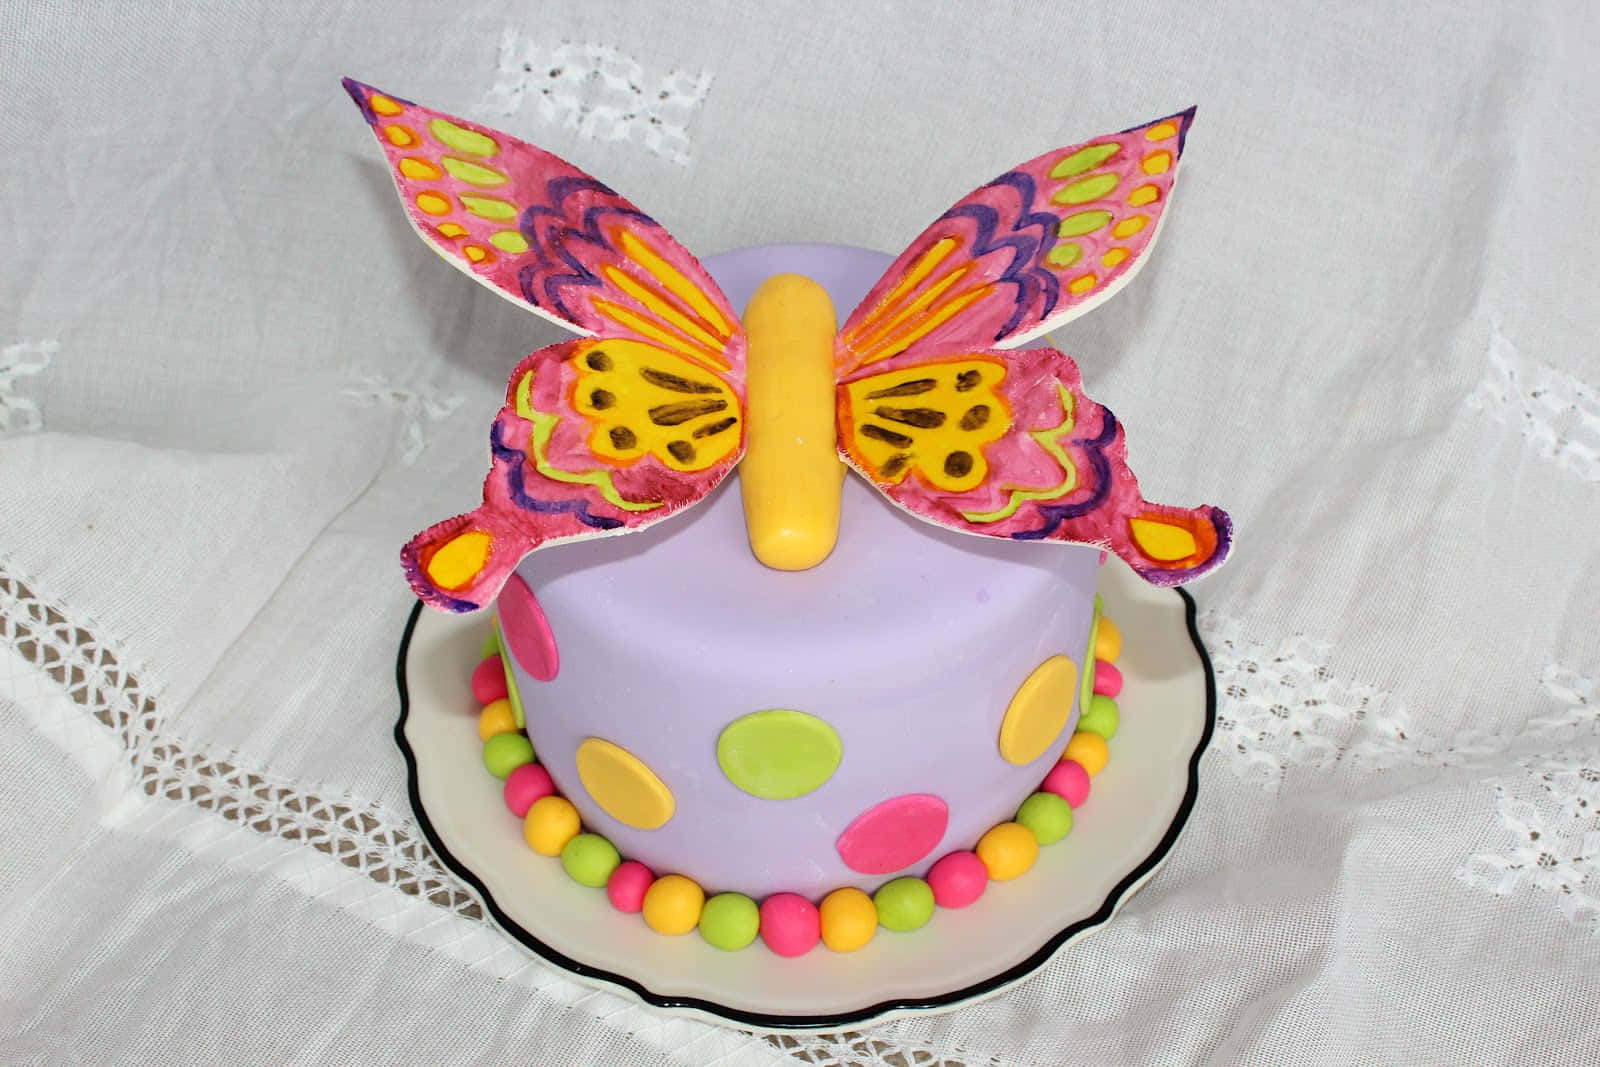 Delightful butterfly cake with colorful swirls and a cherry on top Wallpaper